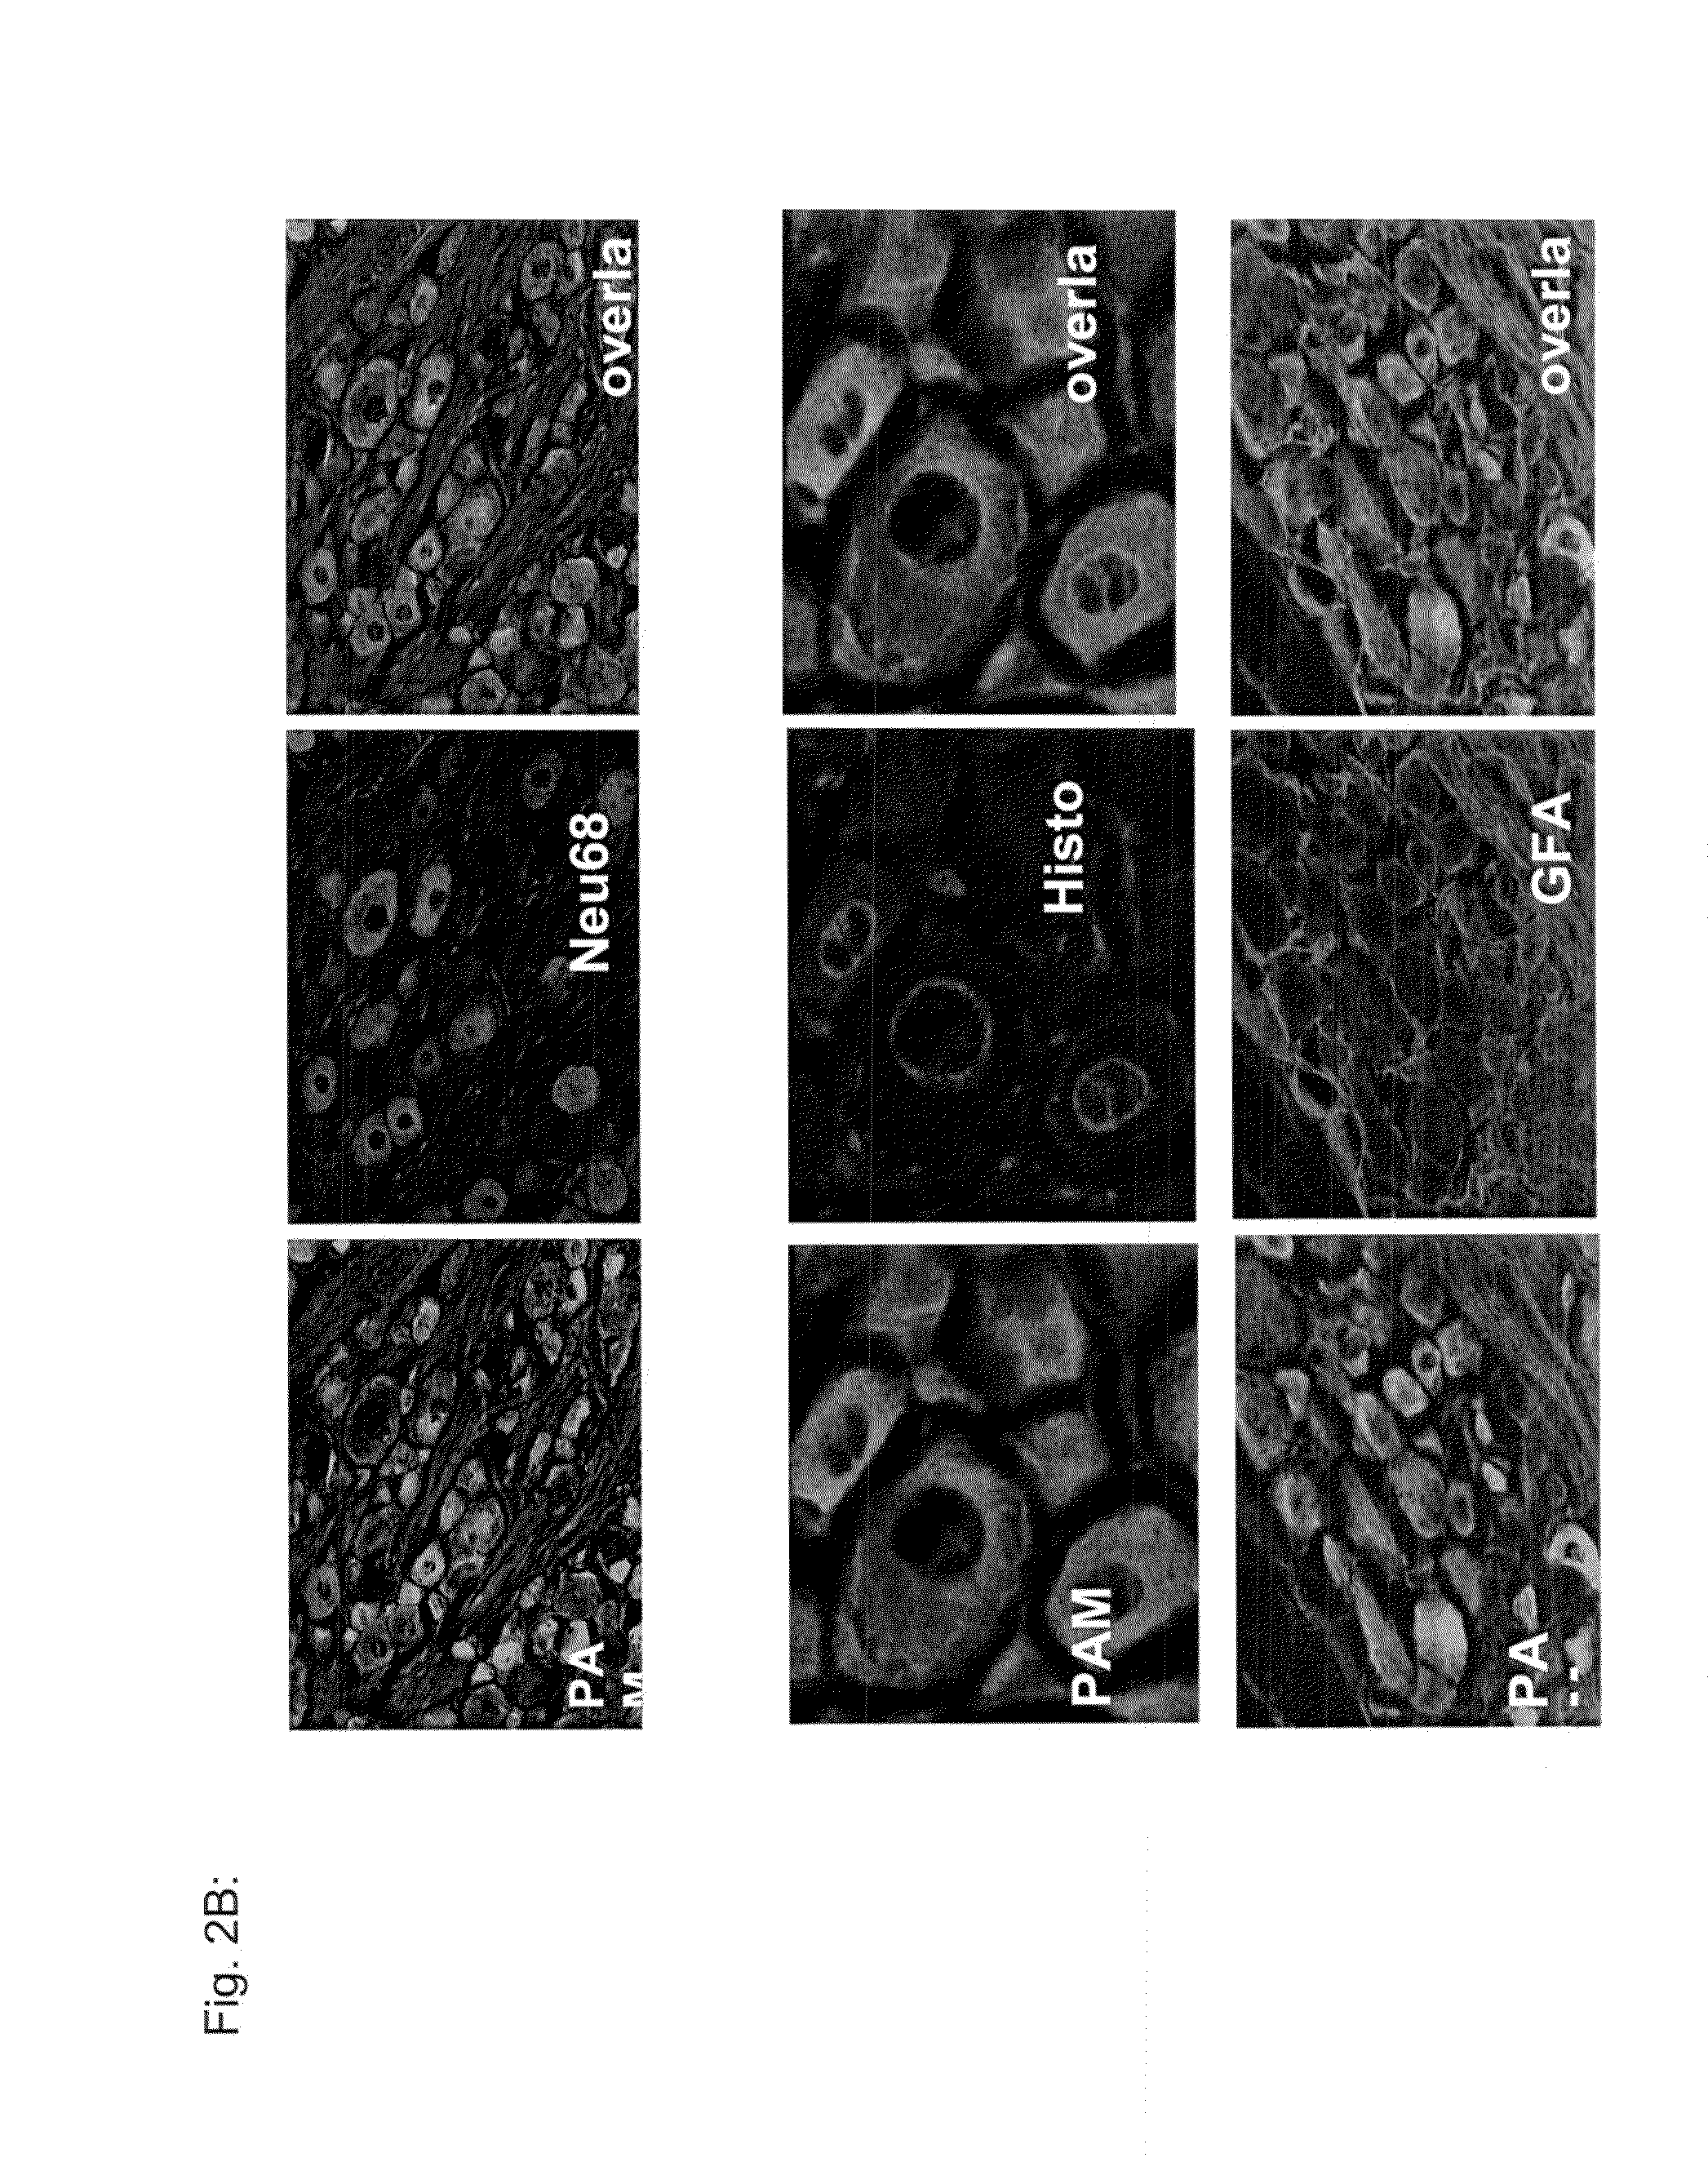 Method for alleviating pain using sphingosine-1-phosphate and related compounds, and assays for identifying such compounds